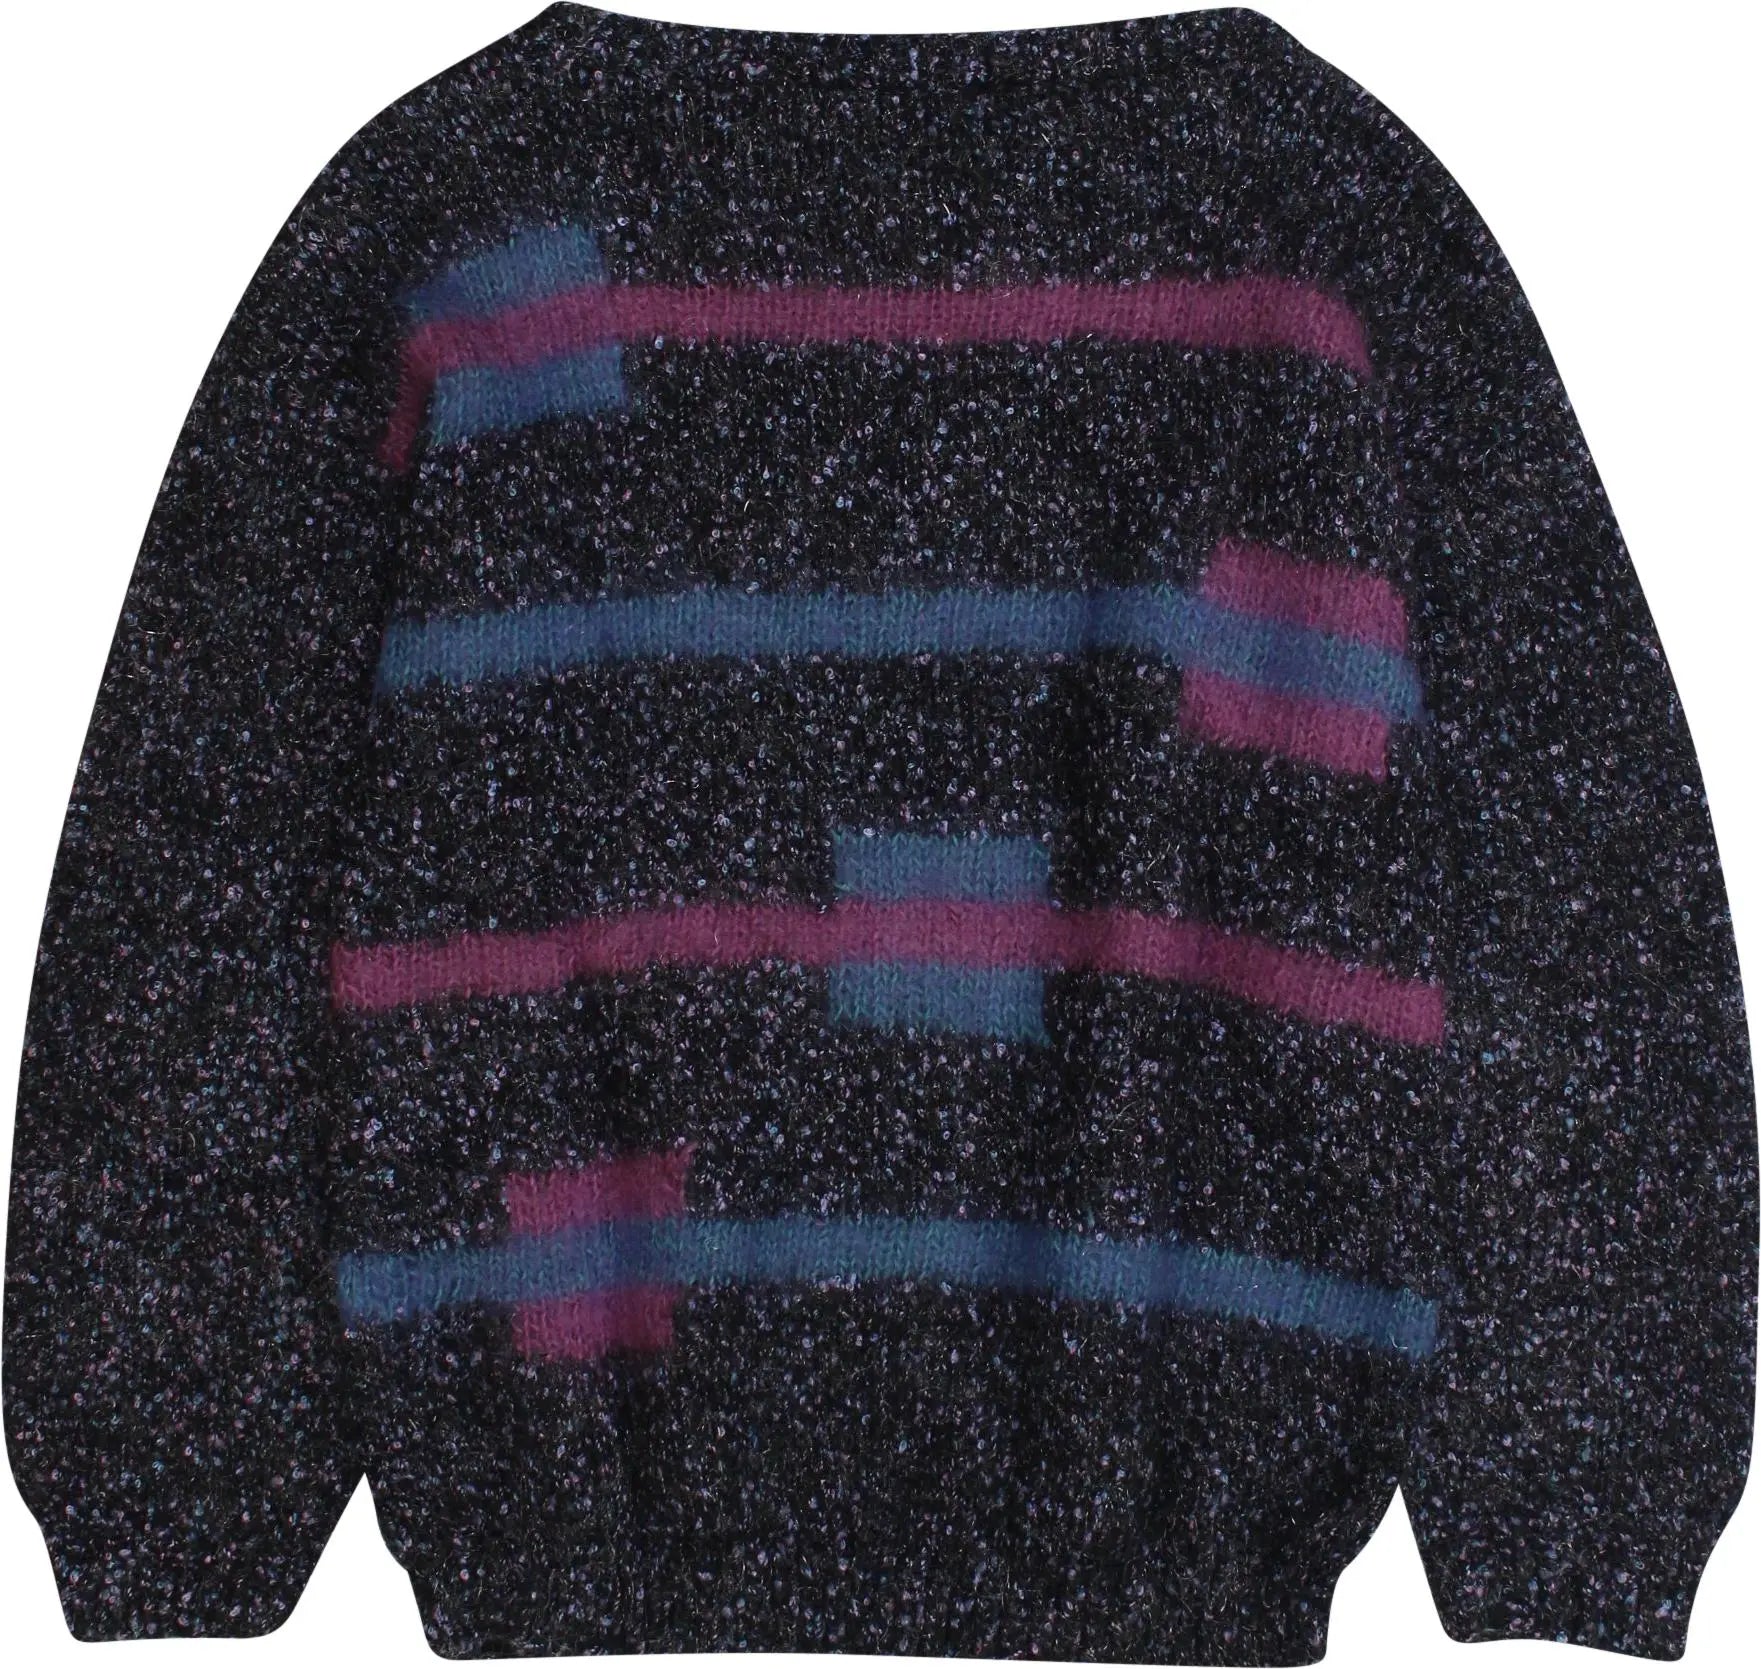 Unknown - 90s Knitted Jumper- ThriftTale.com - Vintage and second handclothing